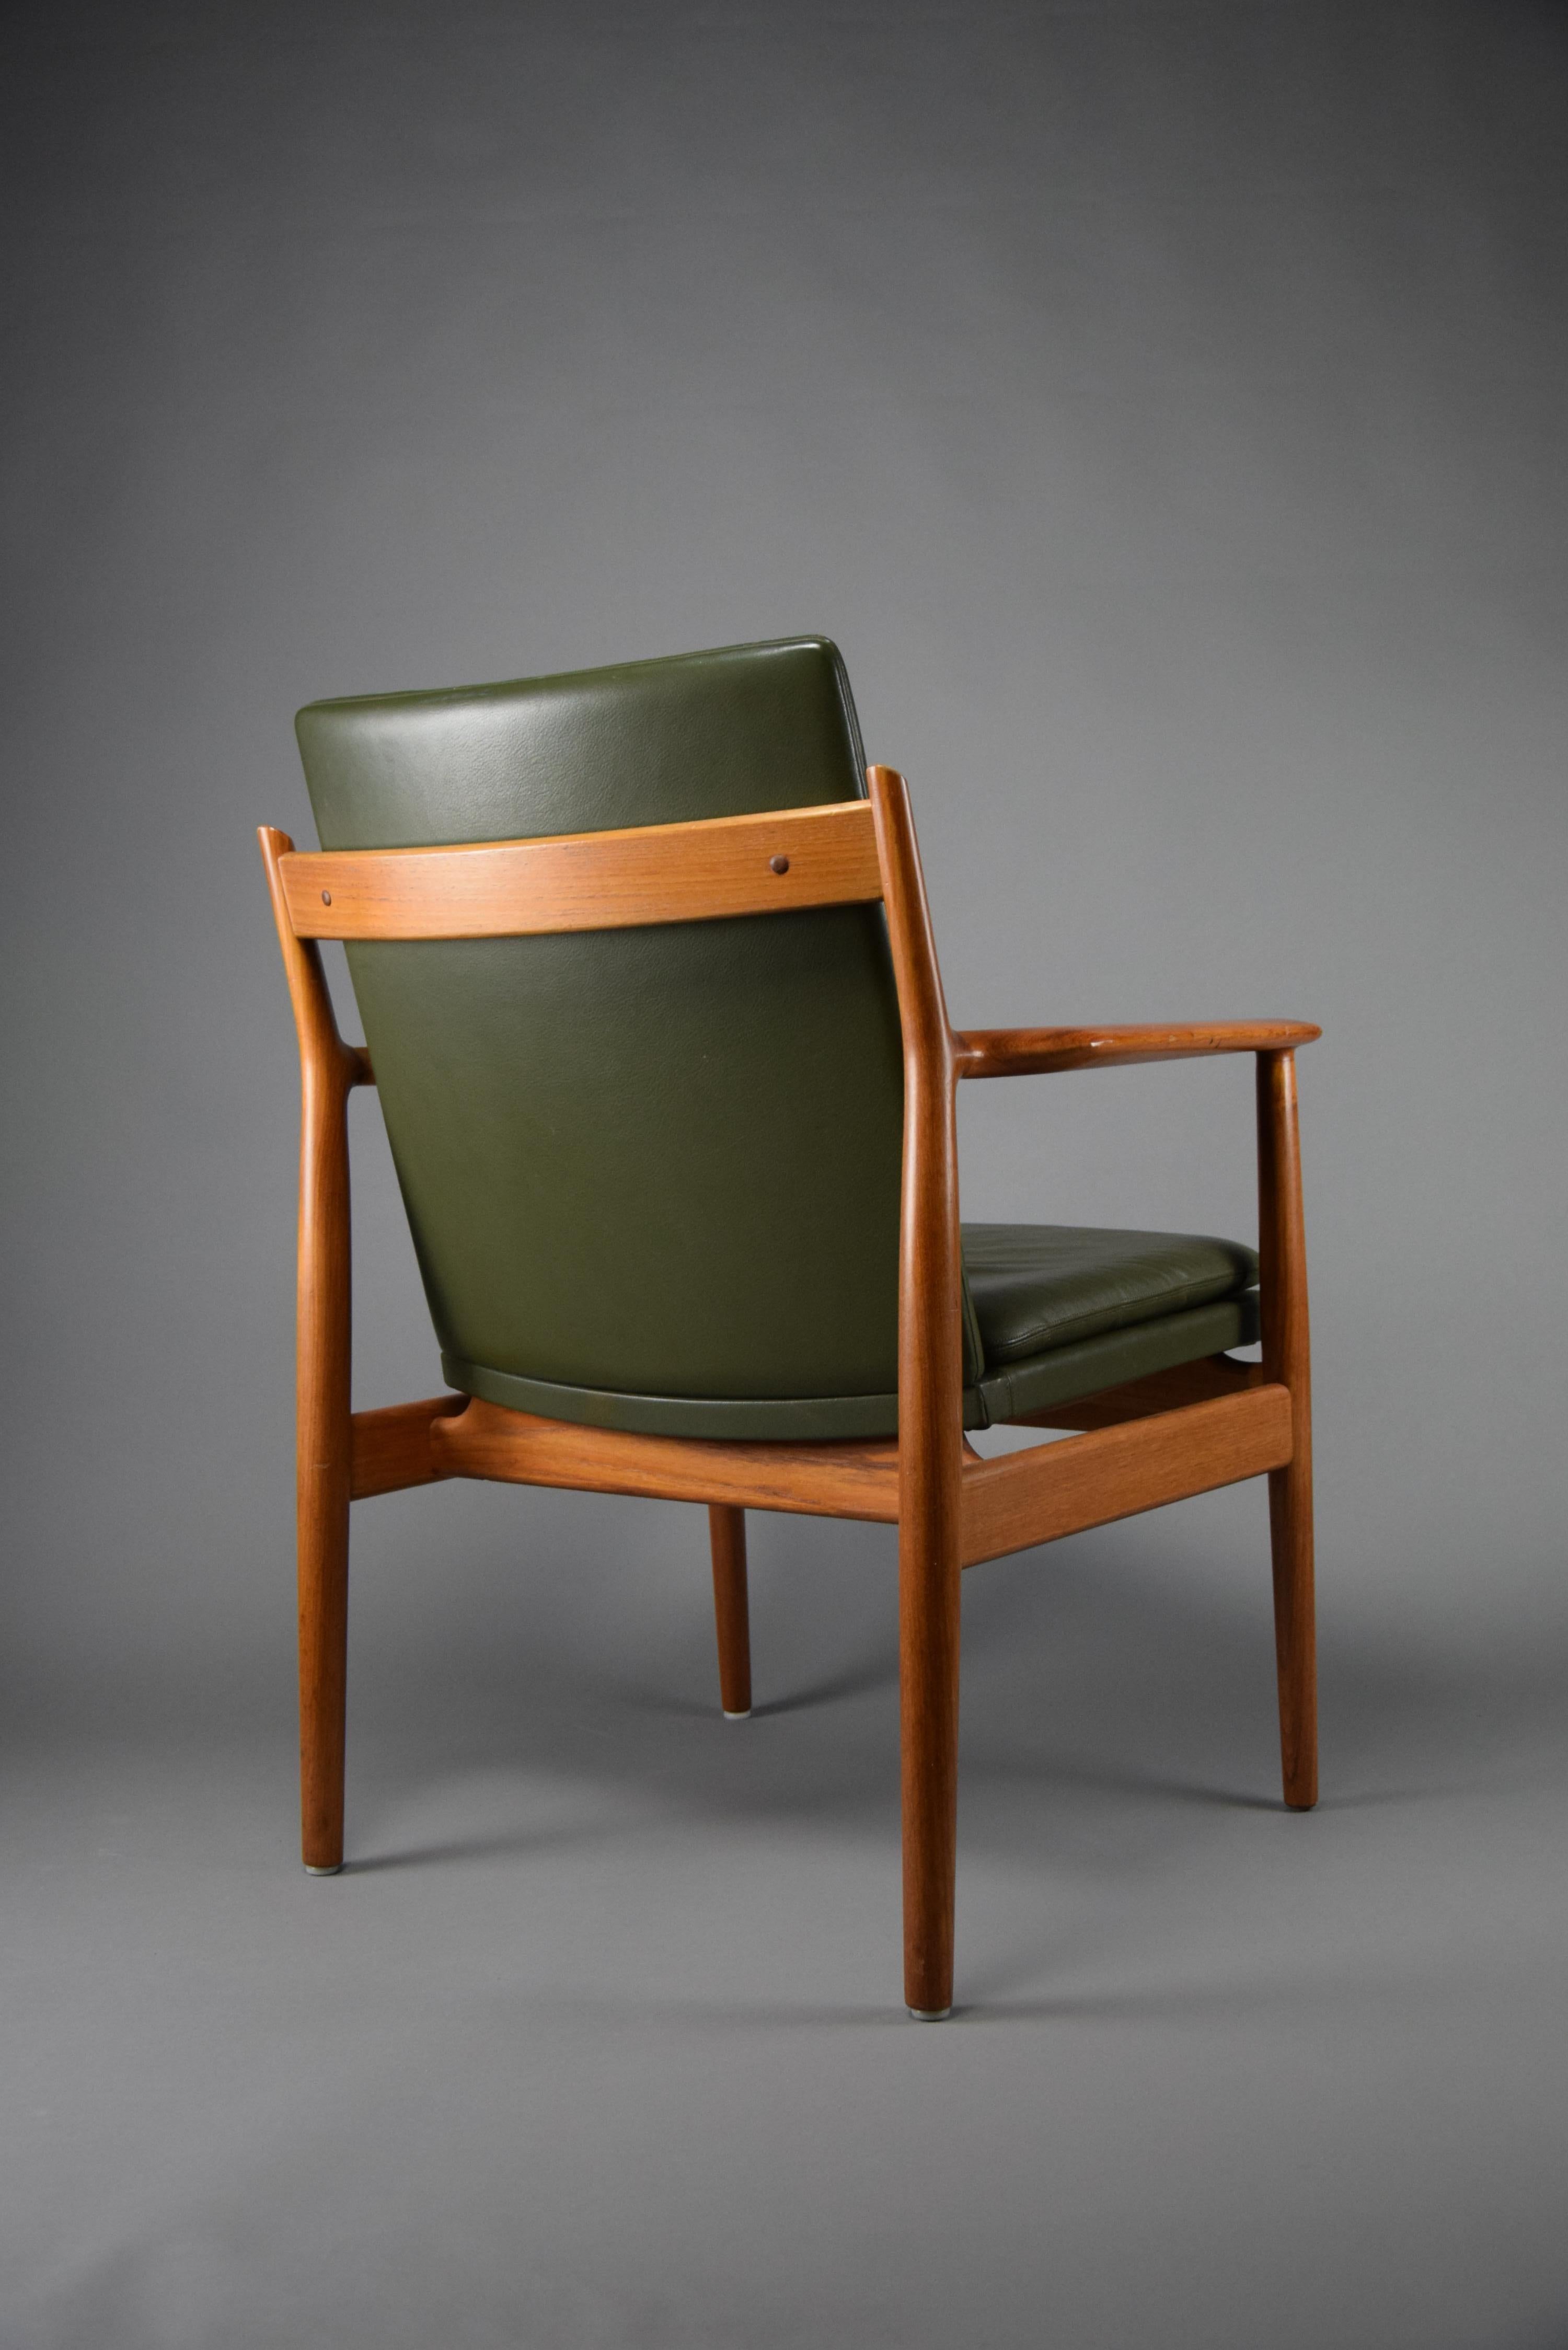 Classy, elegant and stylish. This armchair model 431, has it all. Designed by Arne Vodder in the 1950's and produced by Sibast Denmark in the 1960's. The Jatoba wooden frame is in excellent condition as is the olive colored leather upholstery.

The